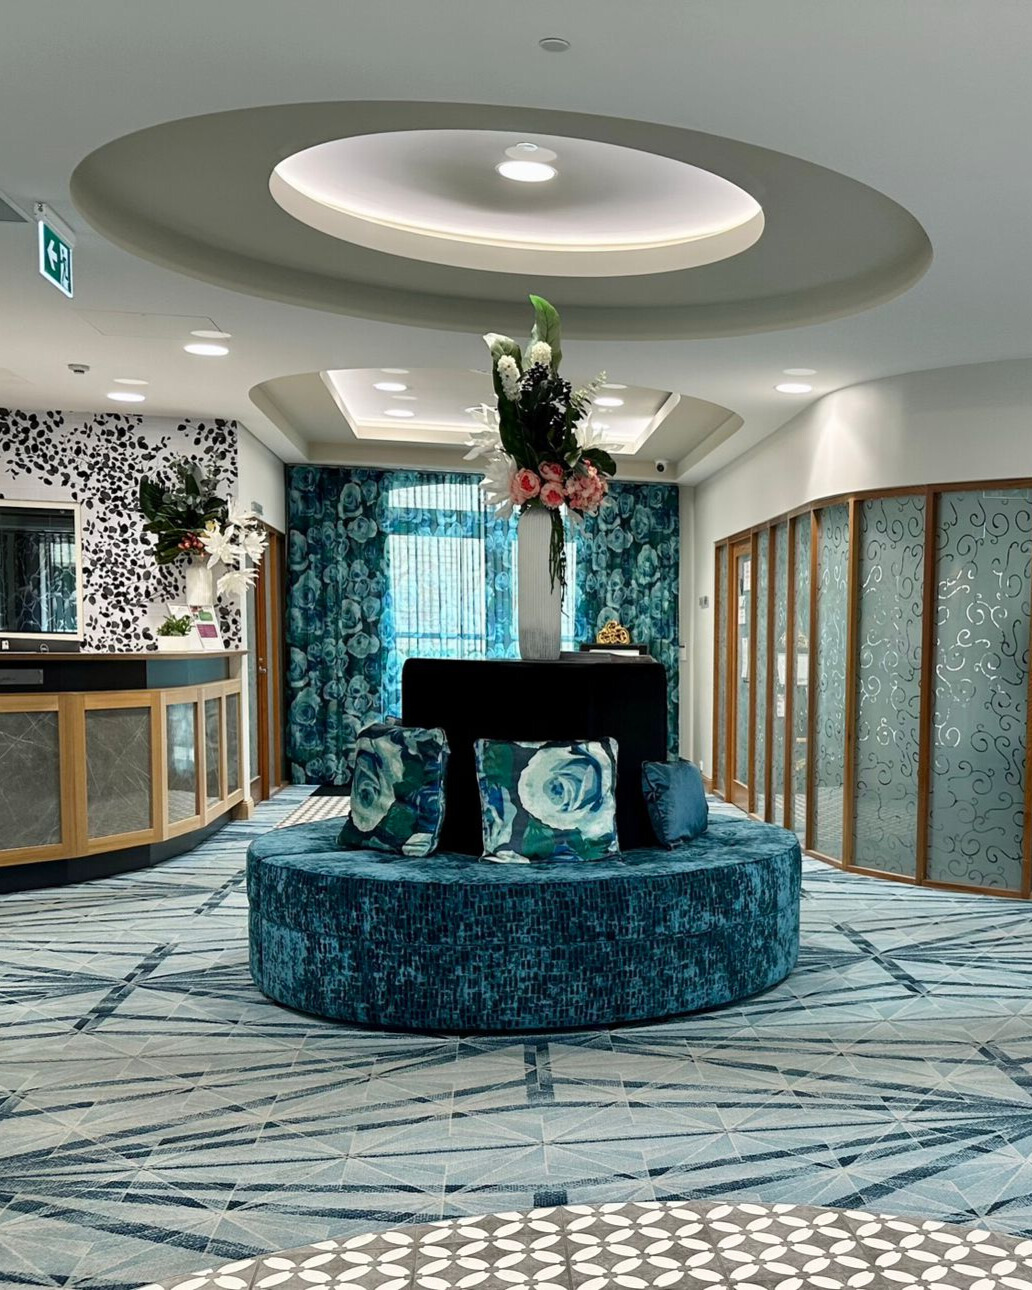 Importance of design in an aged care setting. Custom circle seating in reception area.